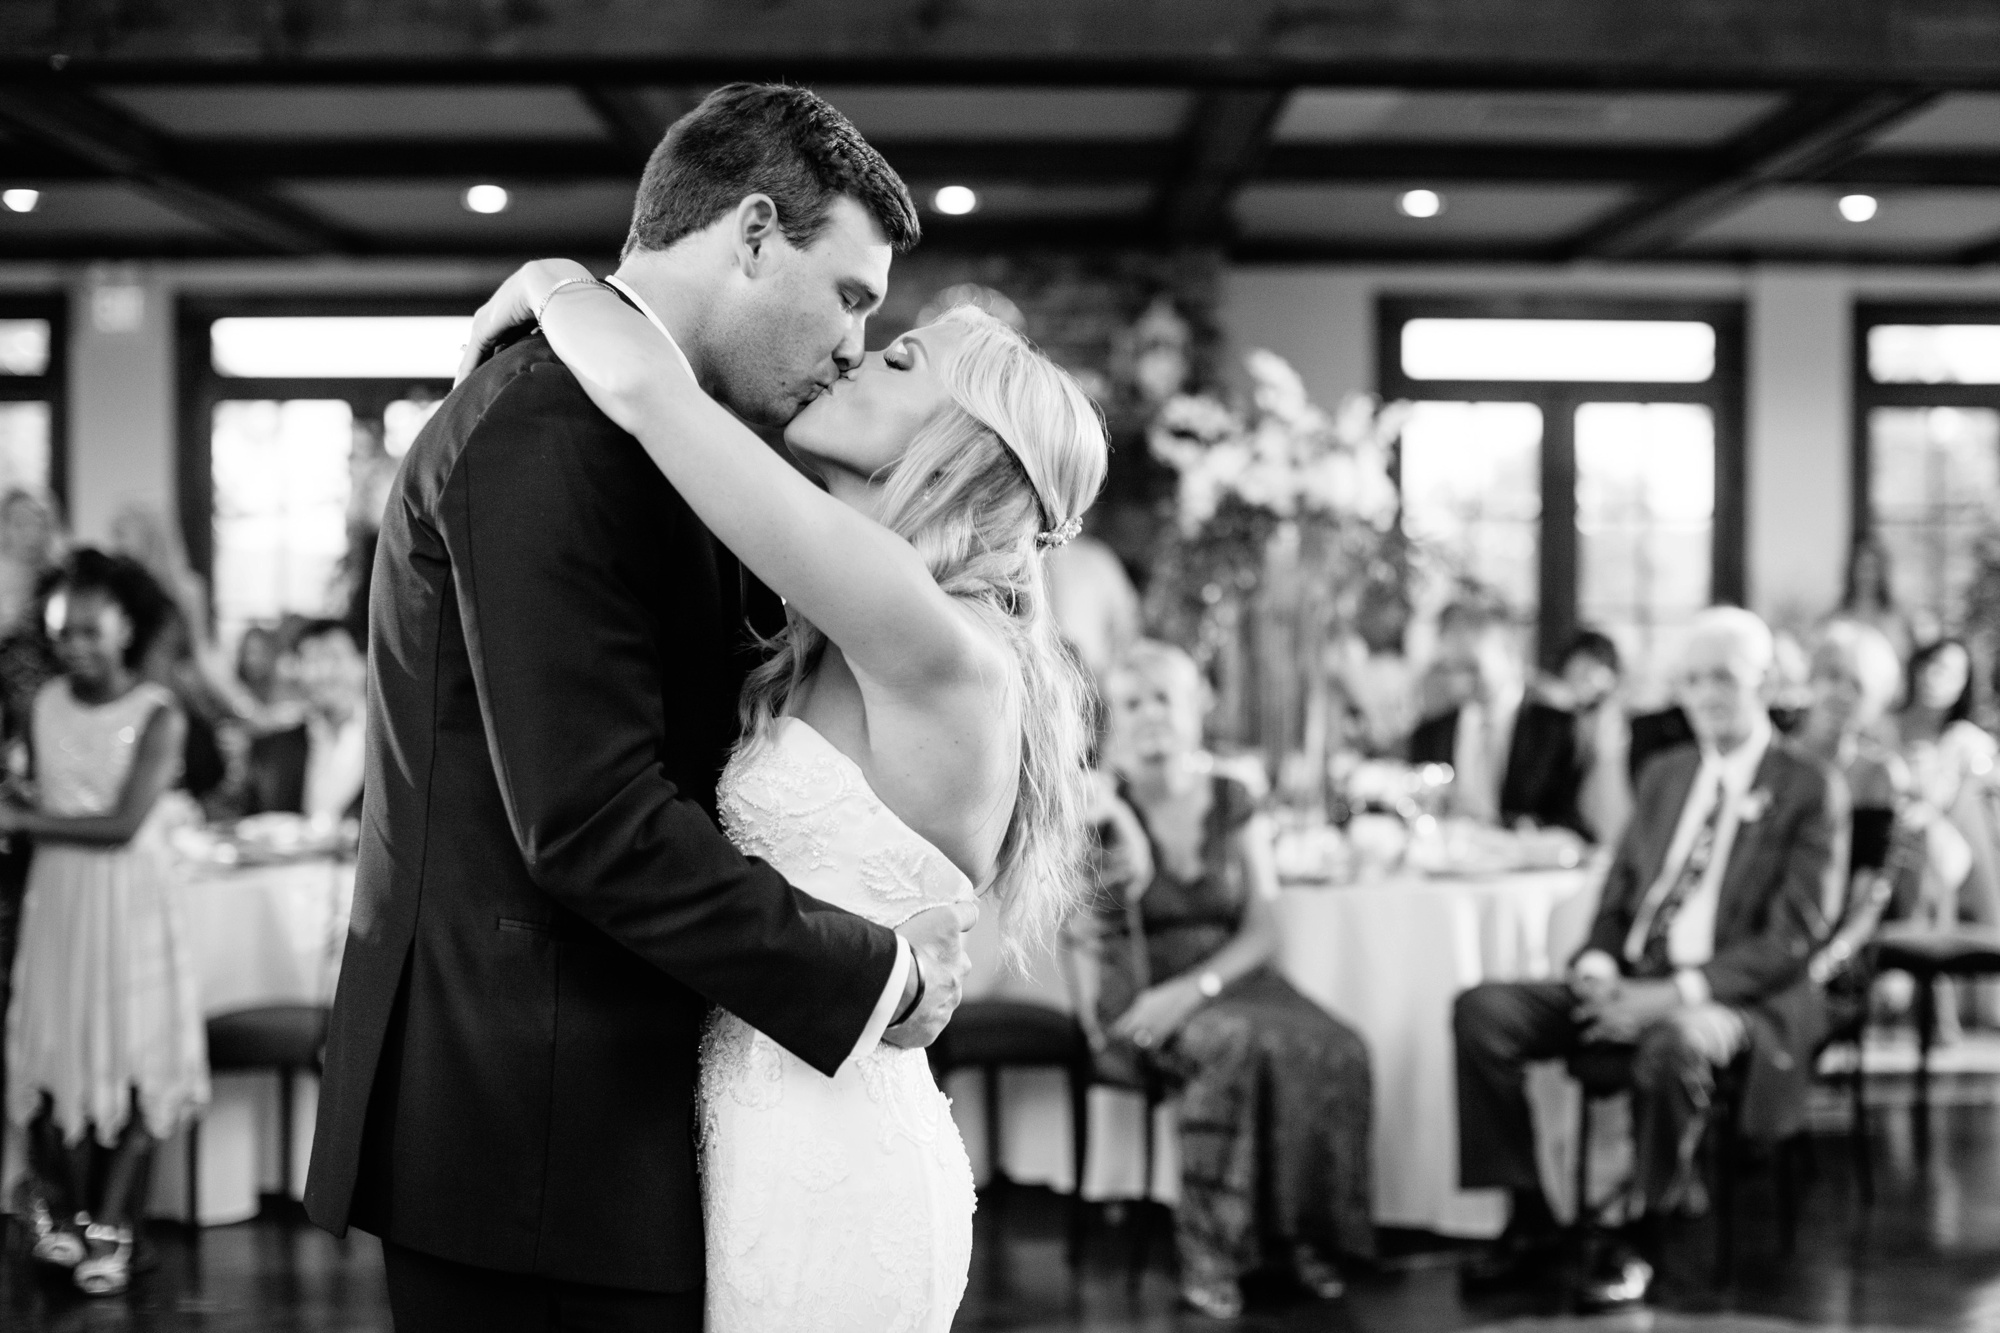 Kisses during the first dance are the best. Love this classic black and white picture captured perfectly by Atlanta's premier luxury wedding photographer Rebecca Cerasani